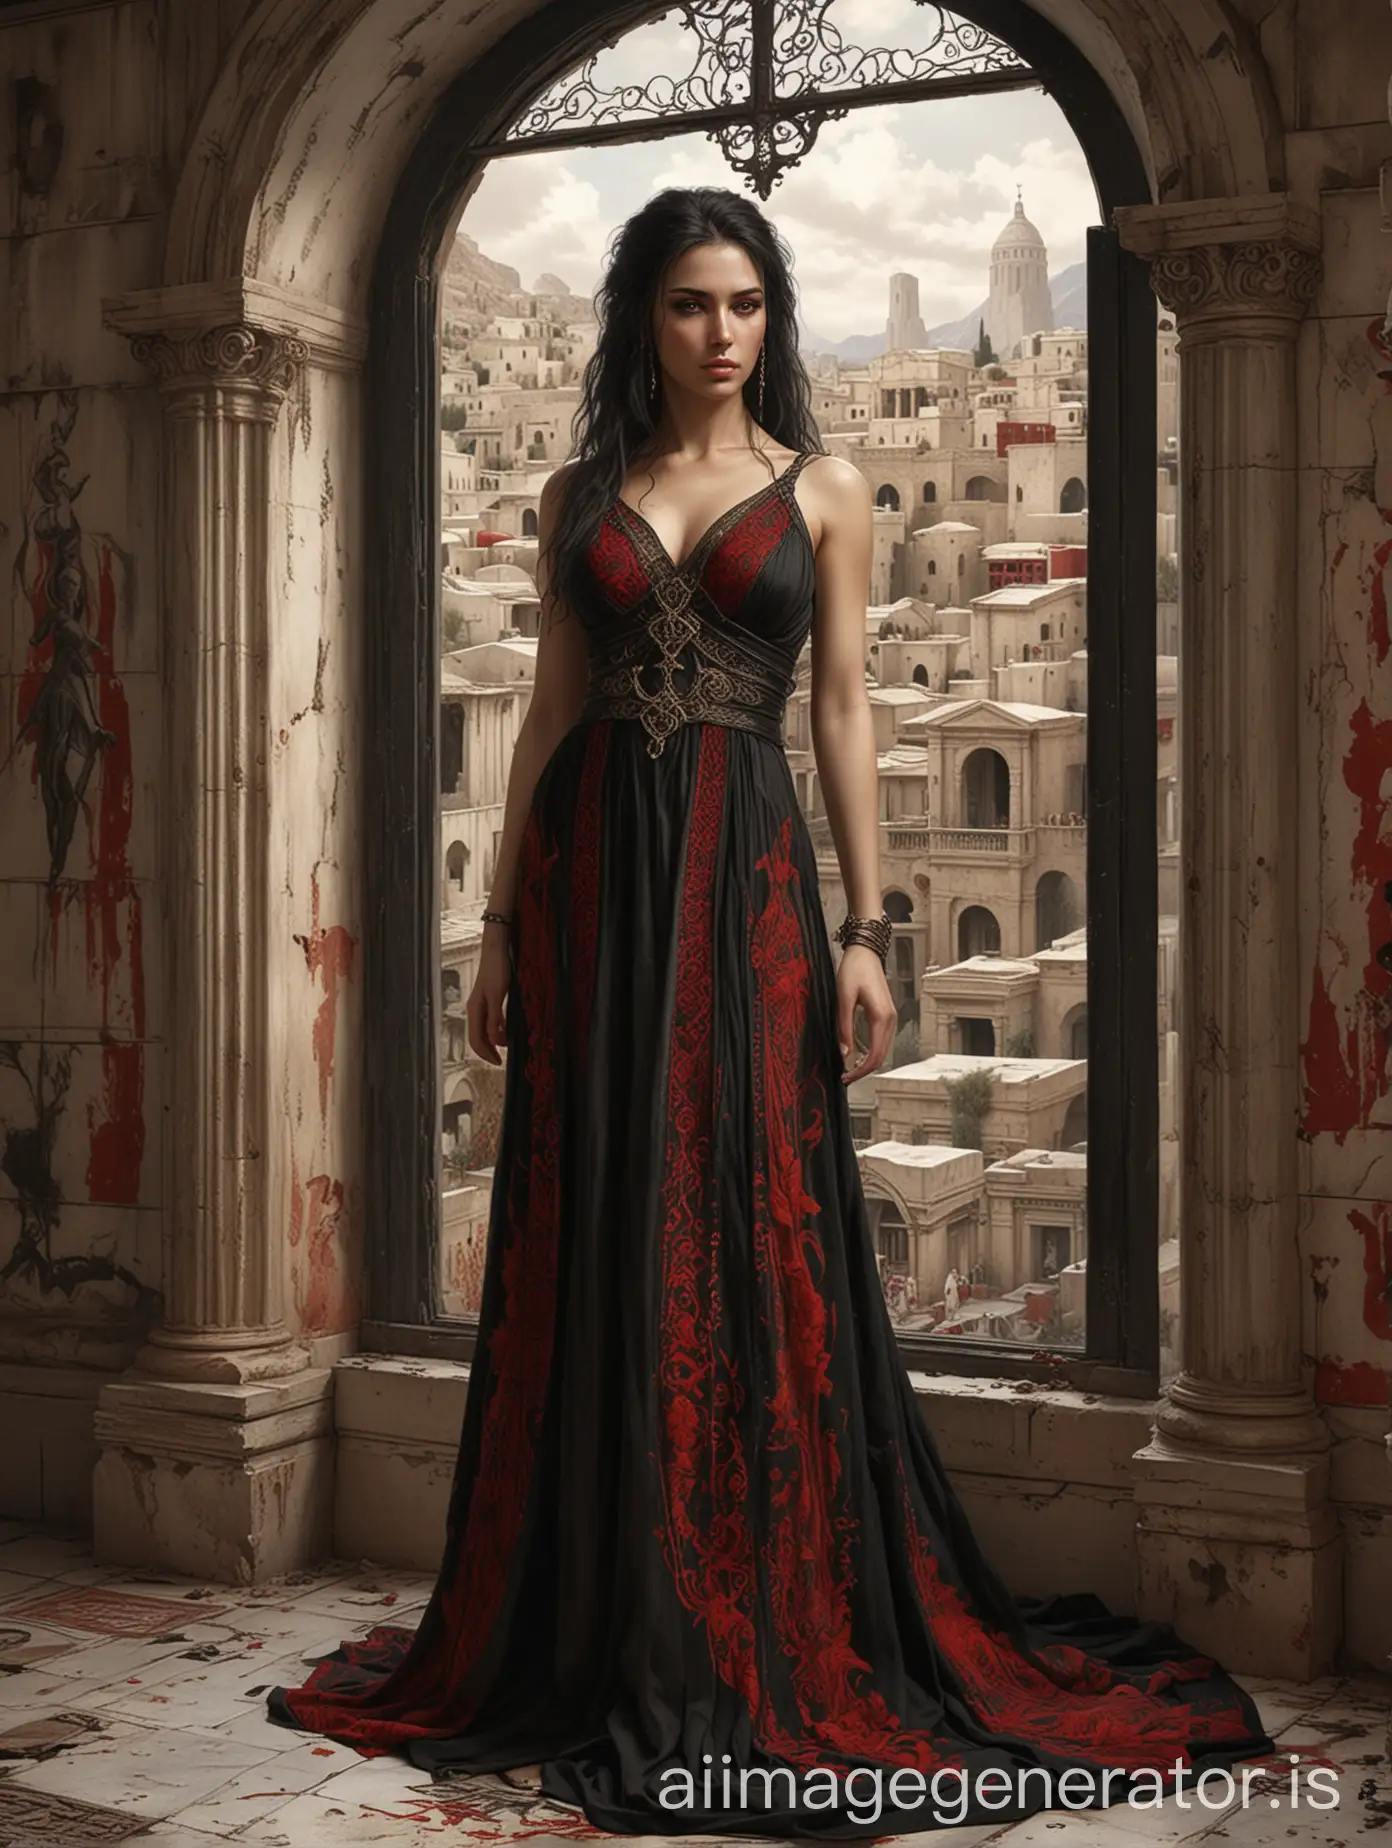 Fantasy-Portrait-of-Rhaenyra-in-Intricate-Ancient-Greek-Style-Gown